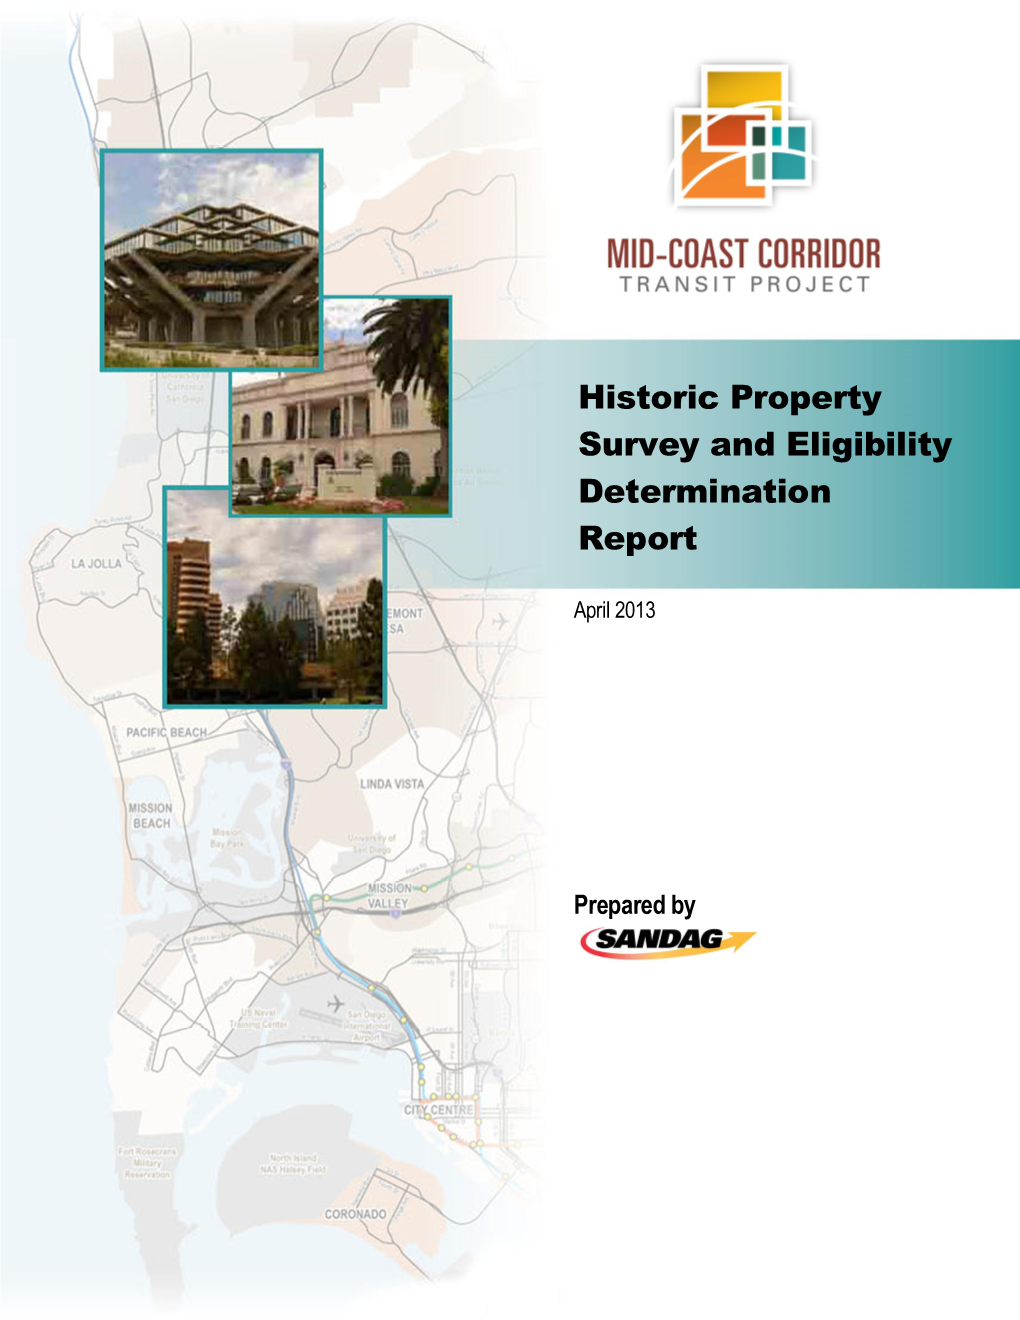 Historic Property Survey and Eligibility Determination Report